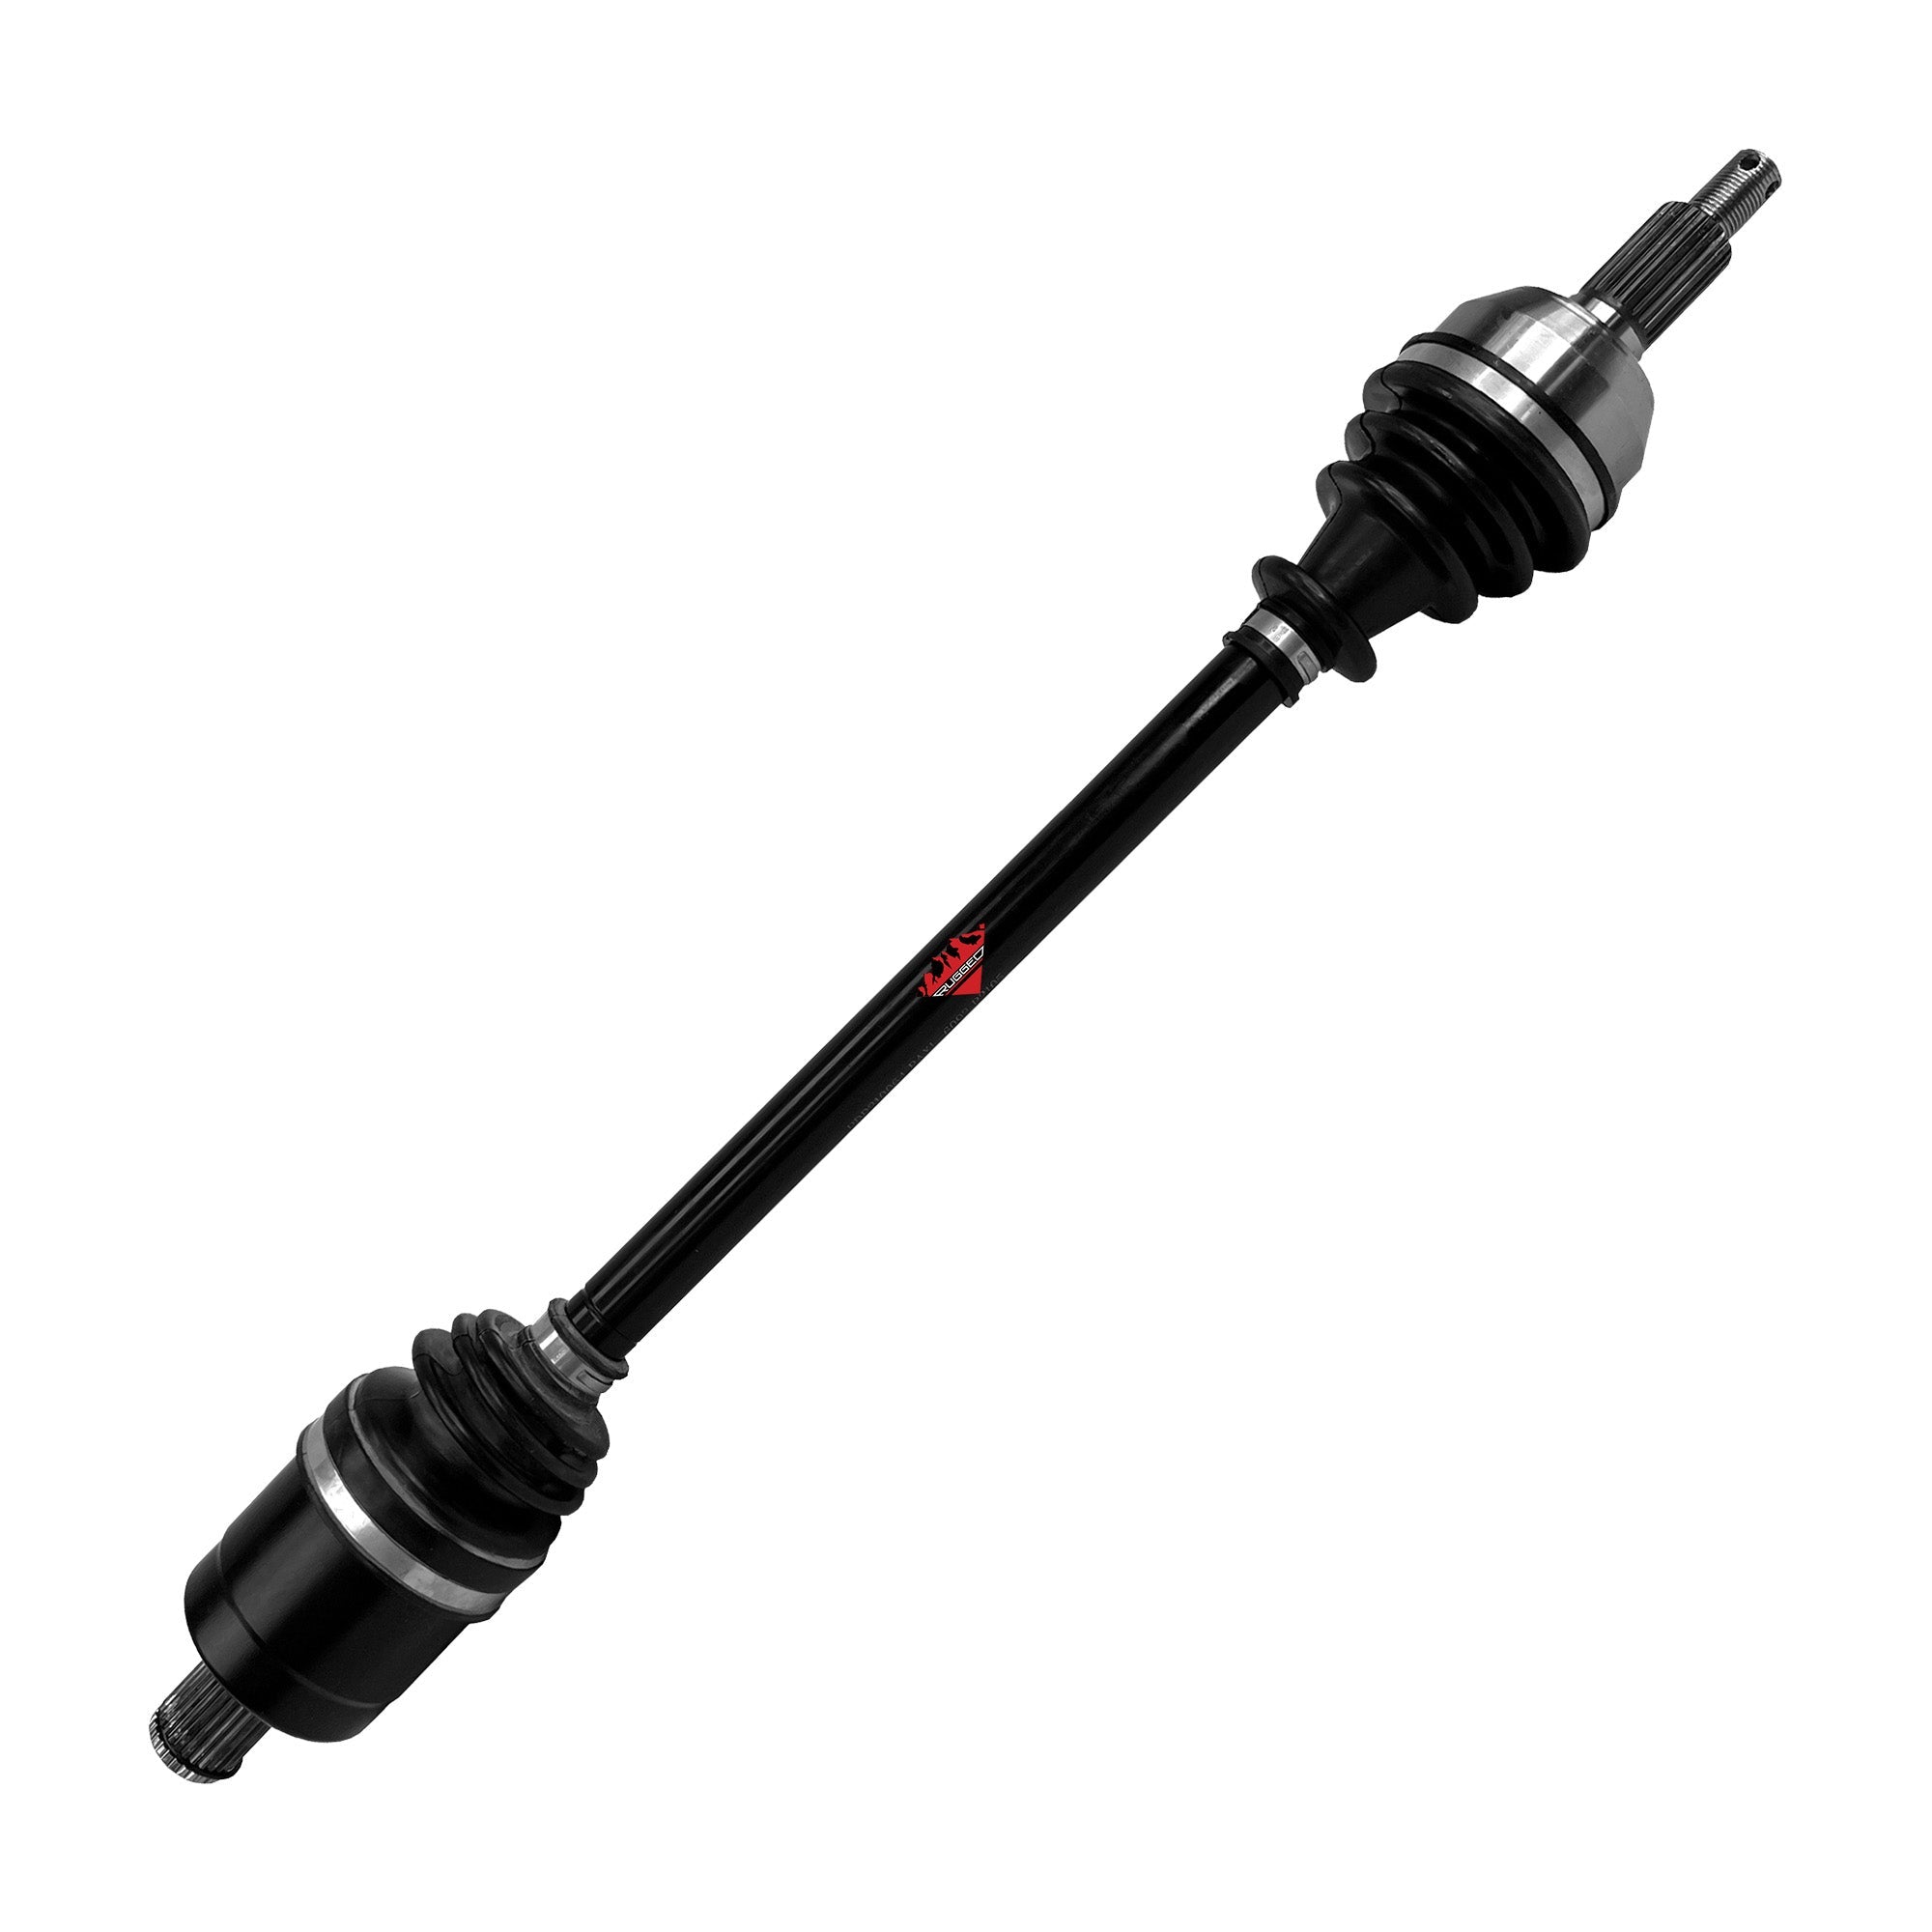 Performance Axle for Arctic Cat TRV 450 